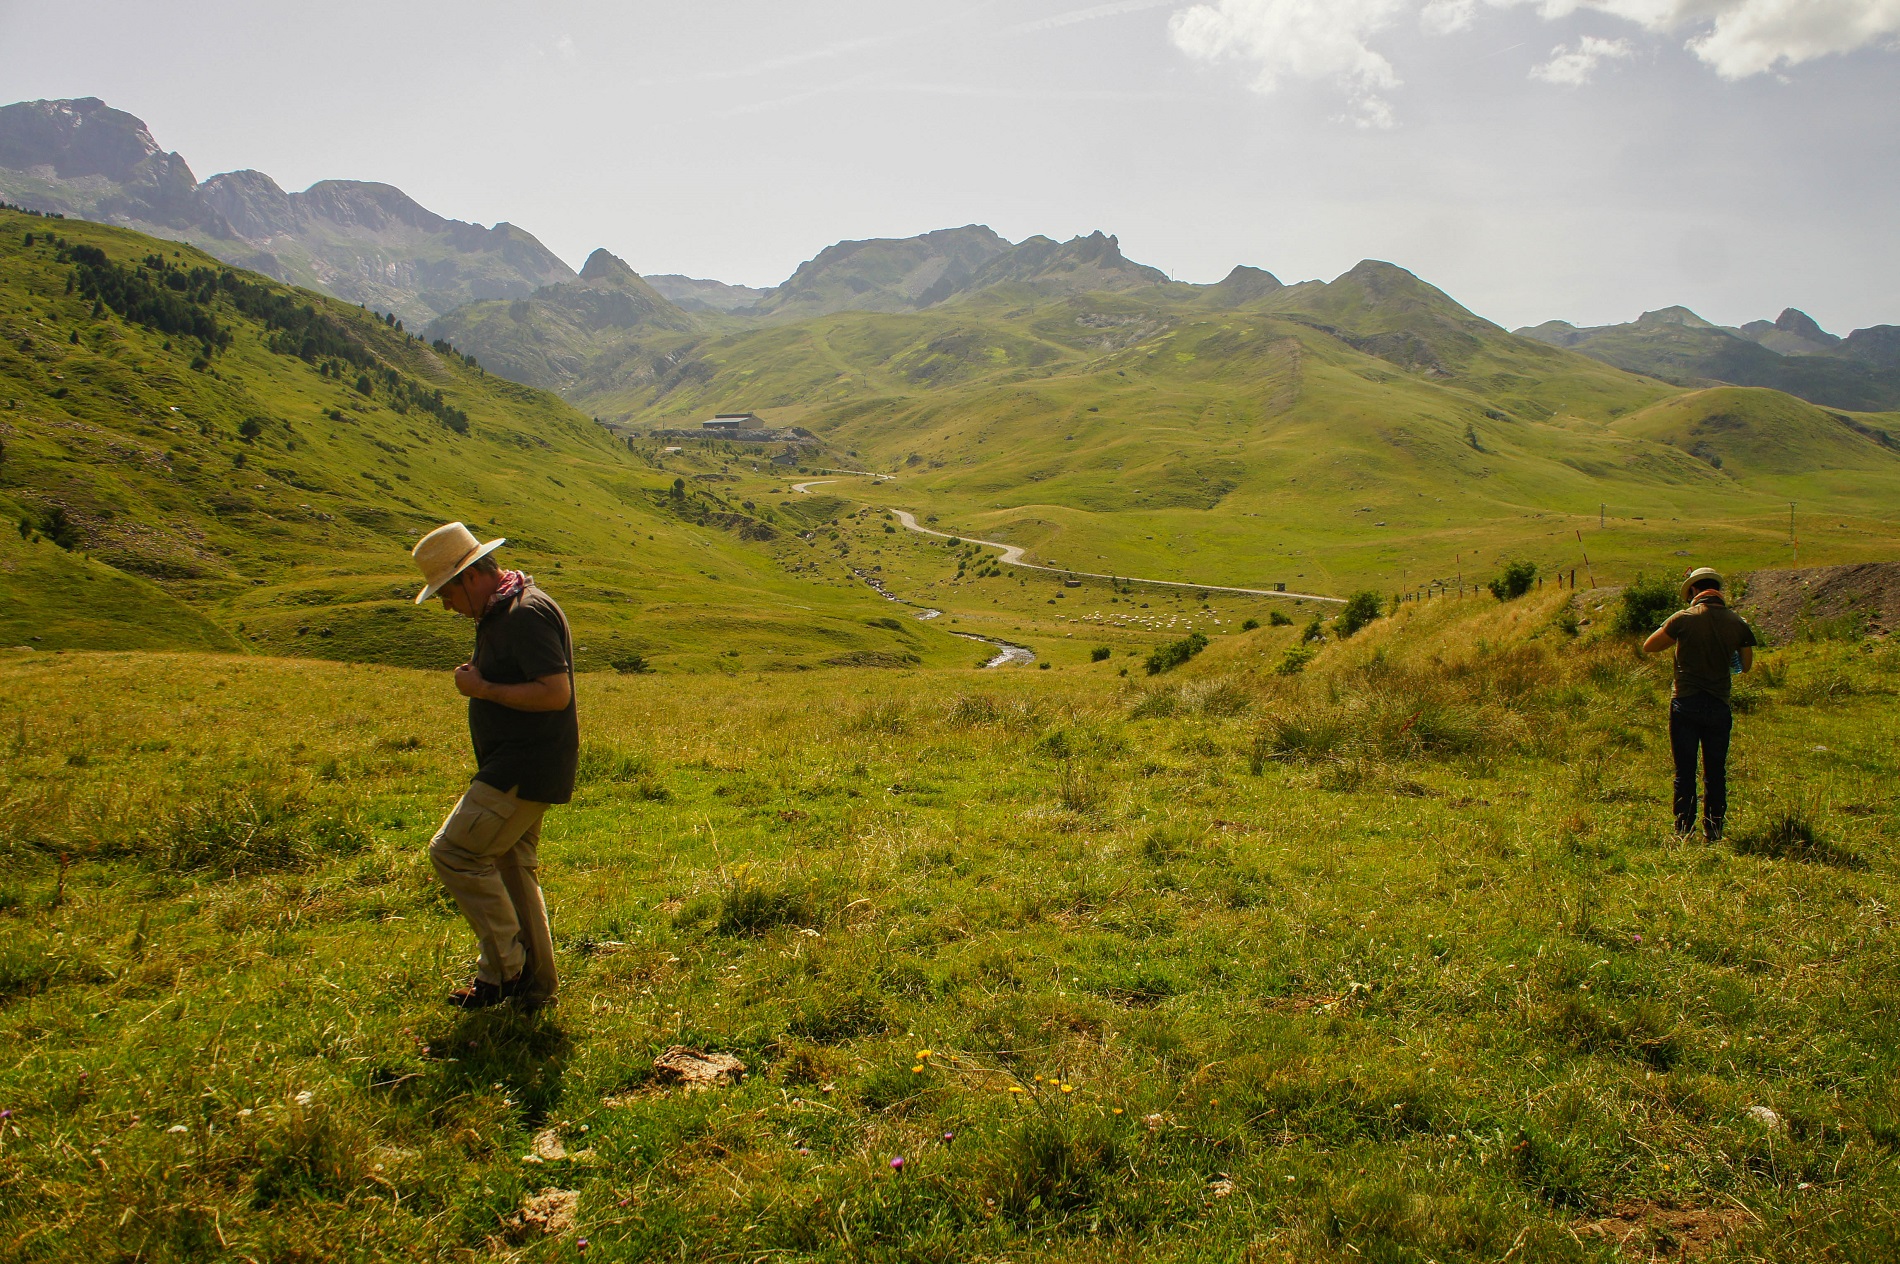 Hunting grasshoppers in the Pyrenees